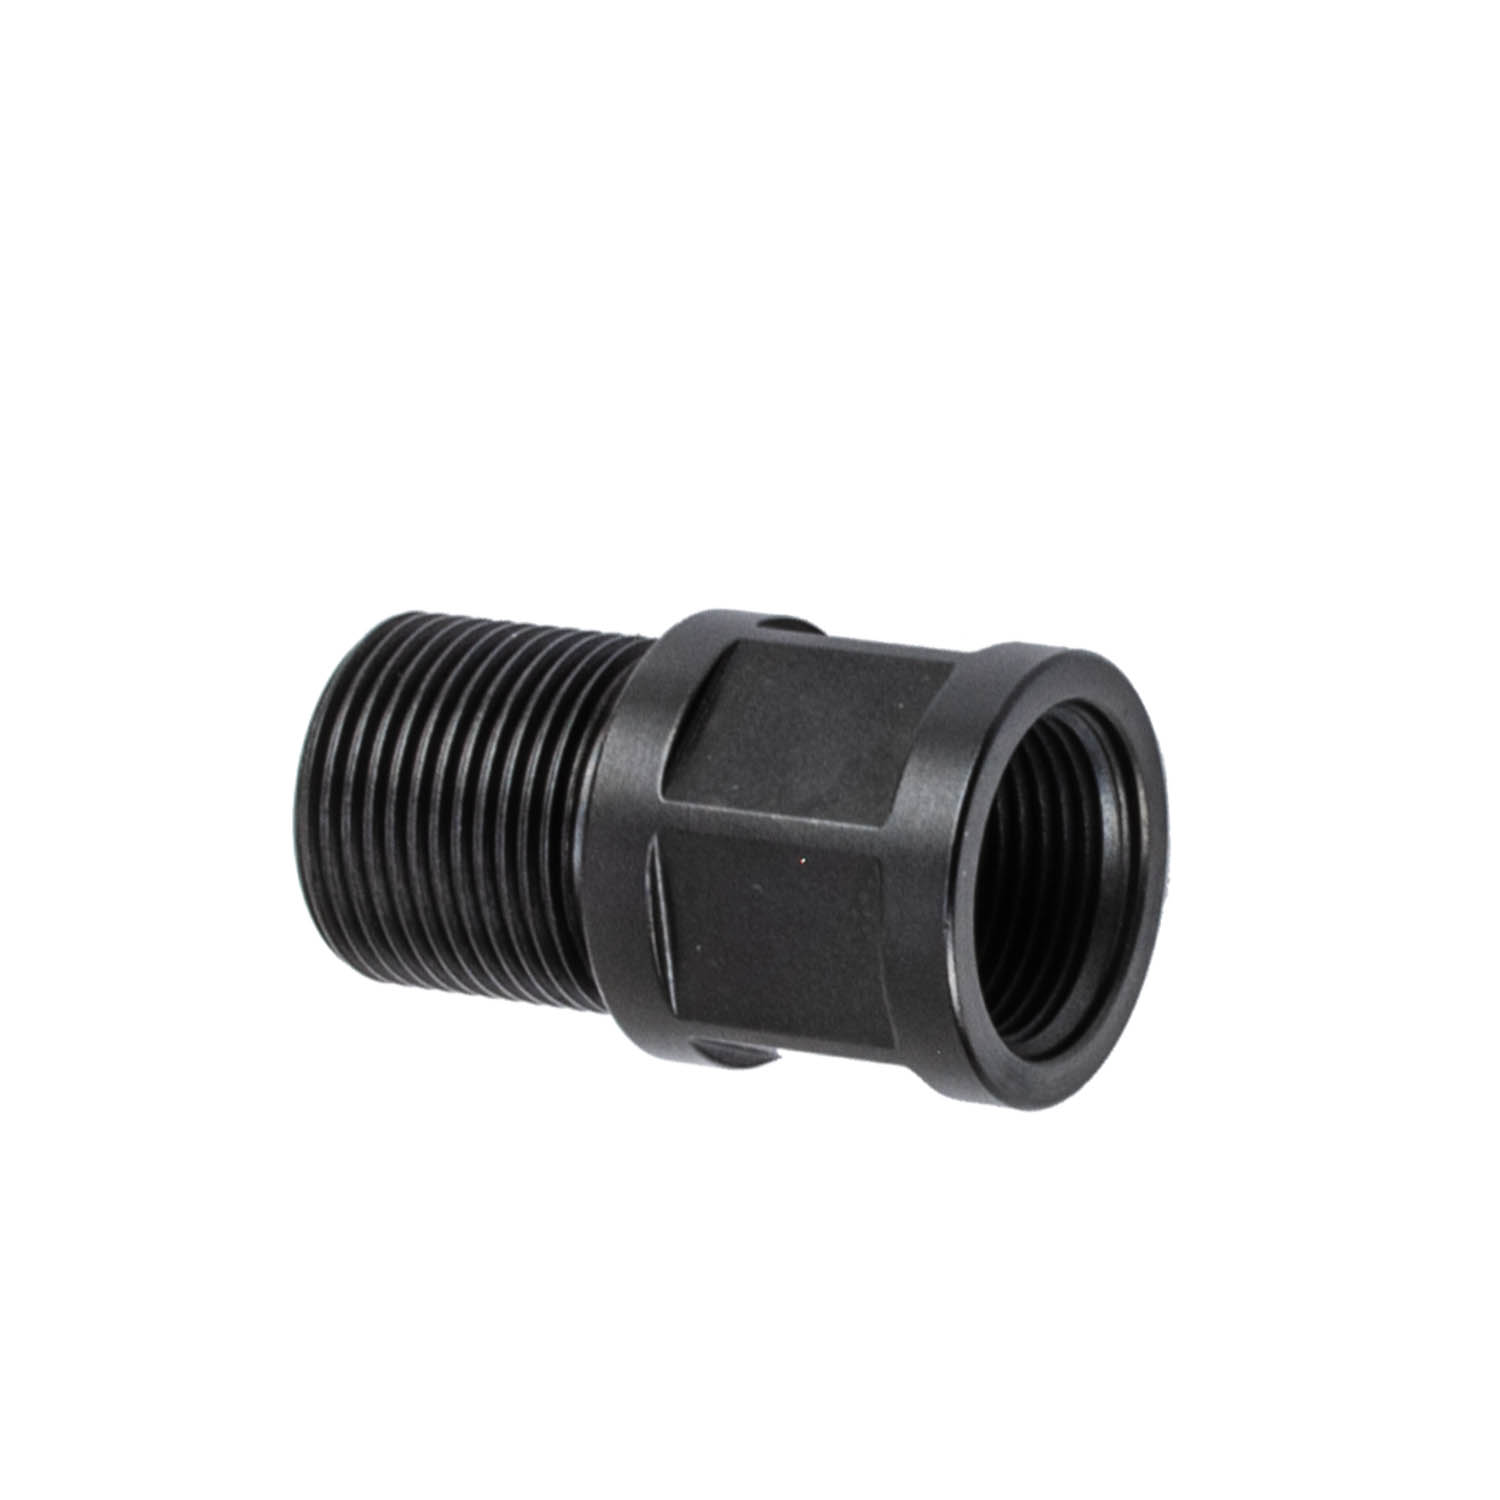 M14X1LH to 3/4-24 Thread Adapter 